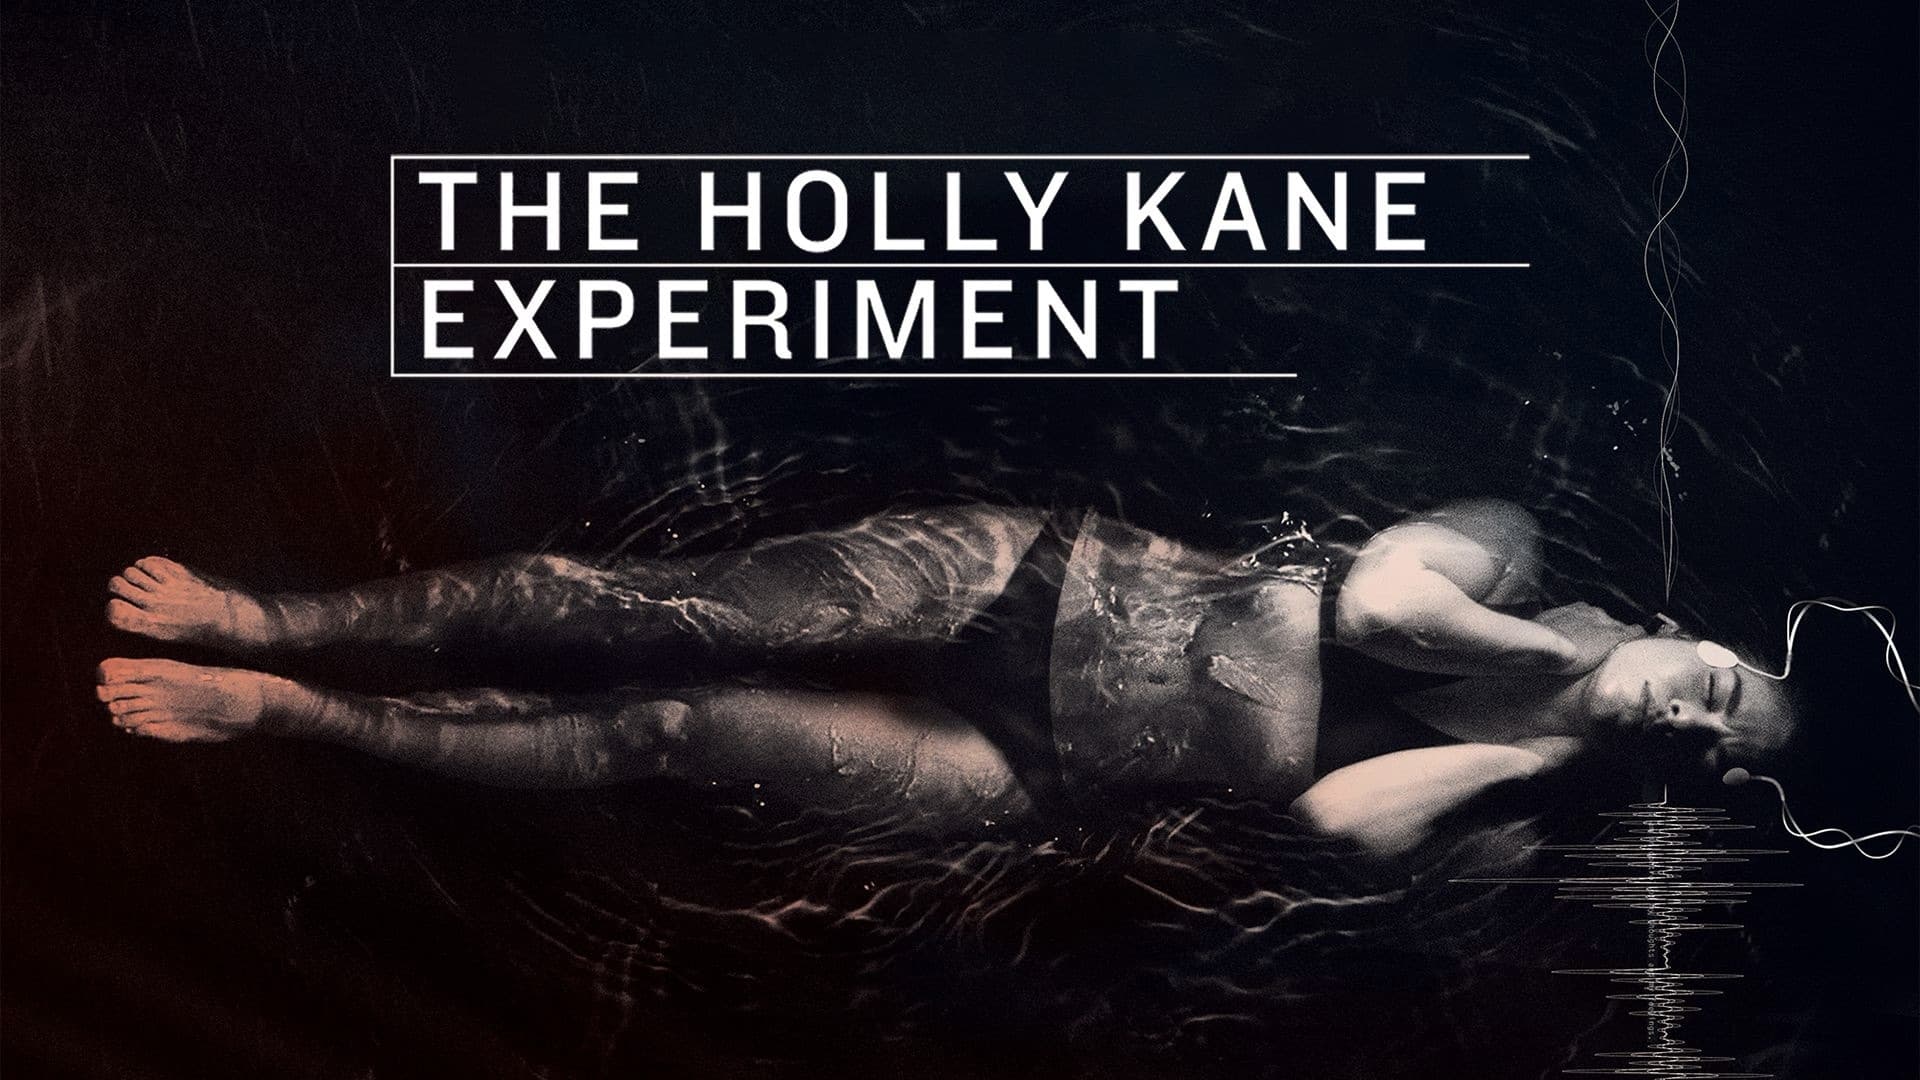 The Holly Kane Experiment (2017)